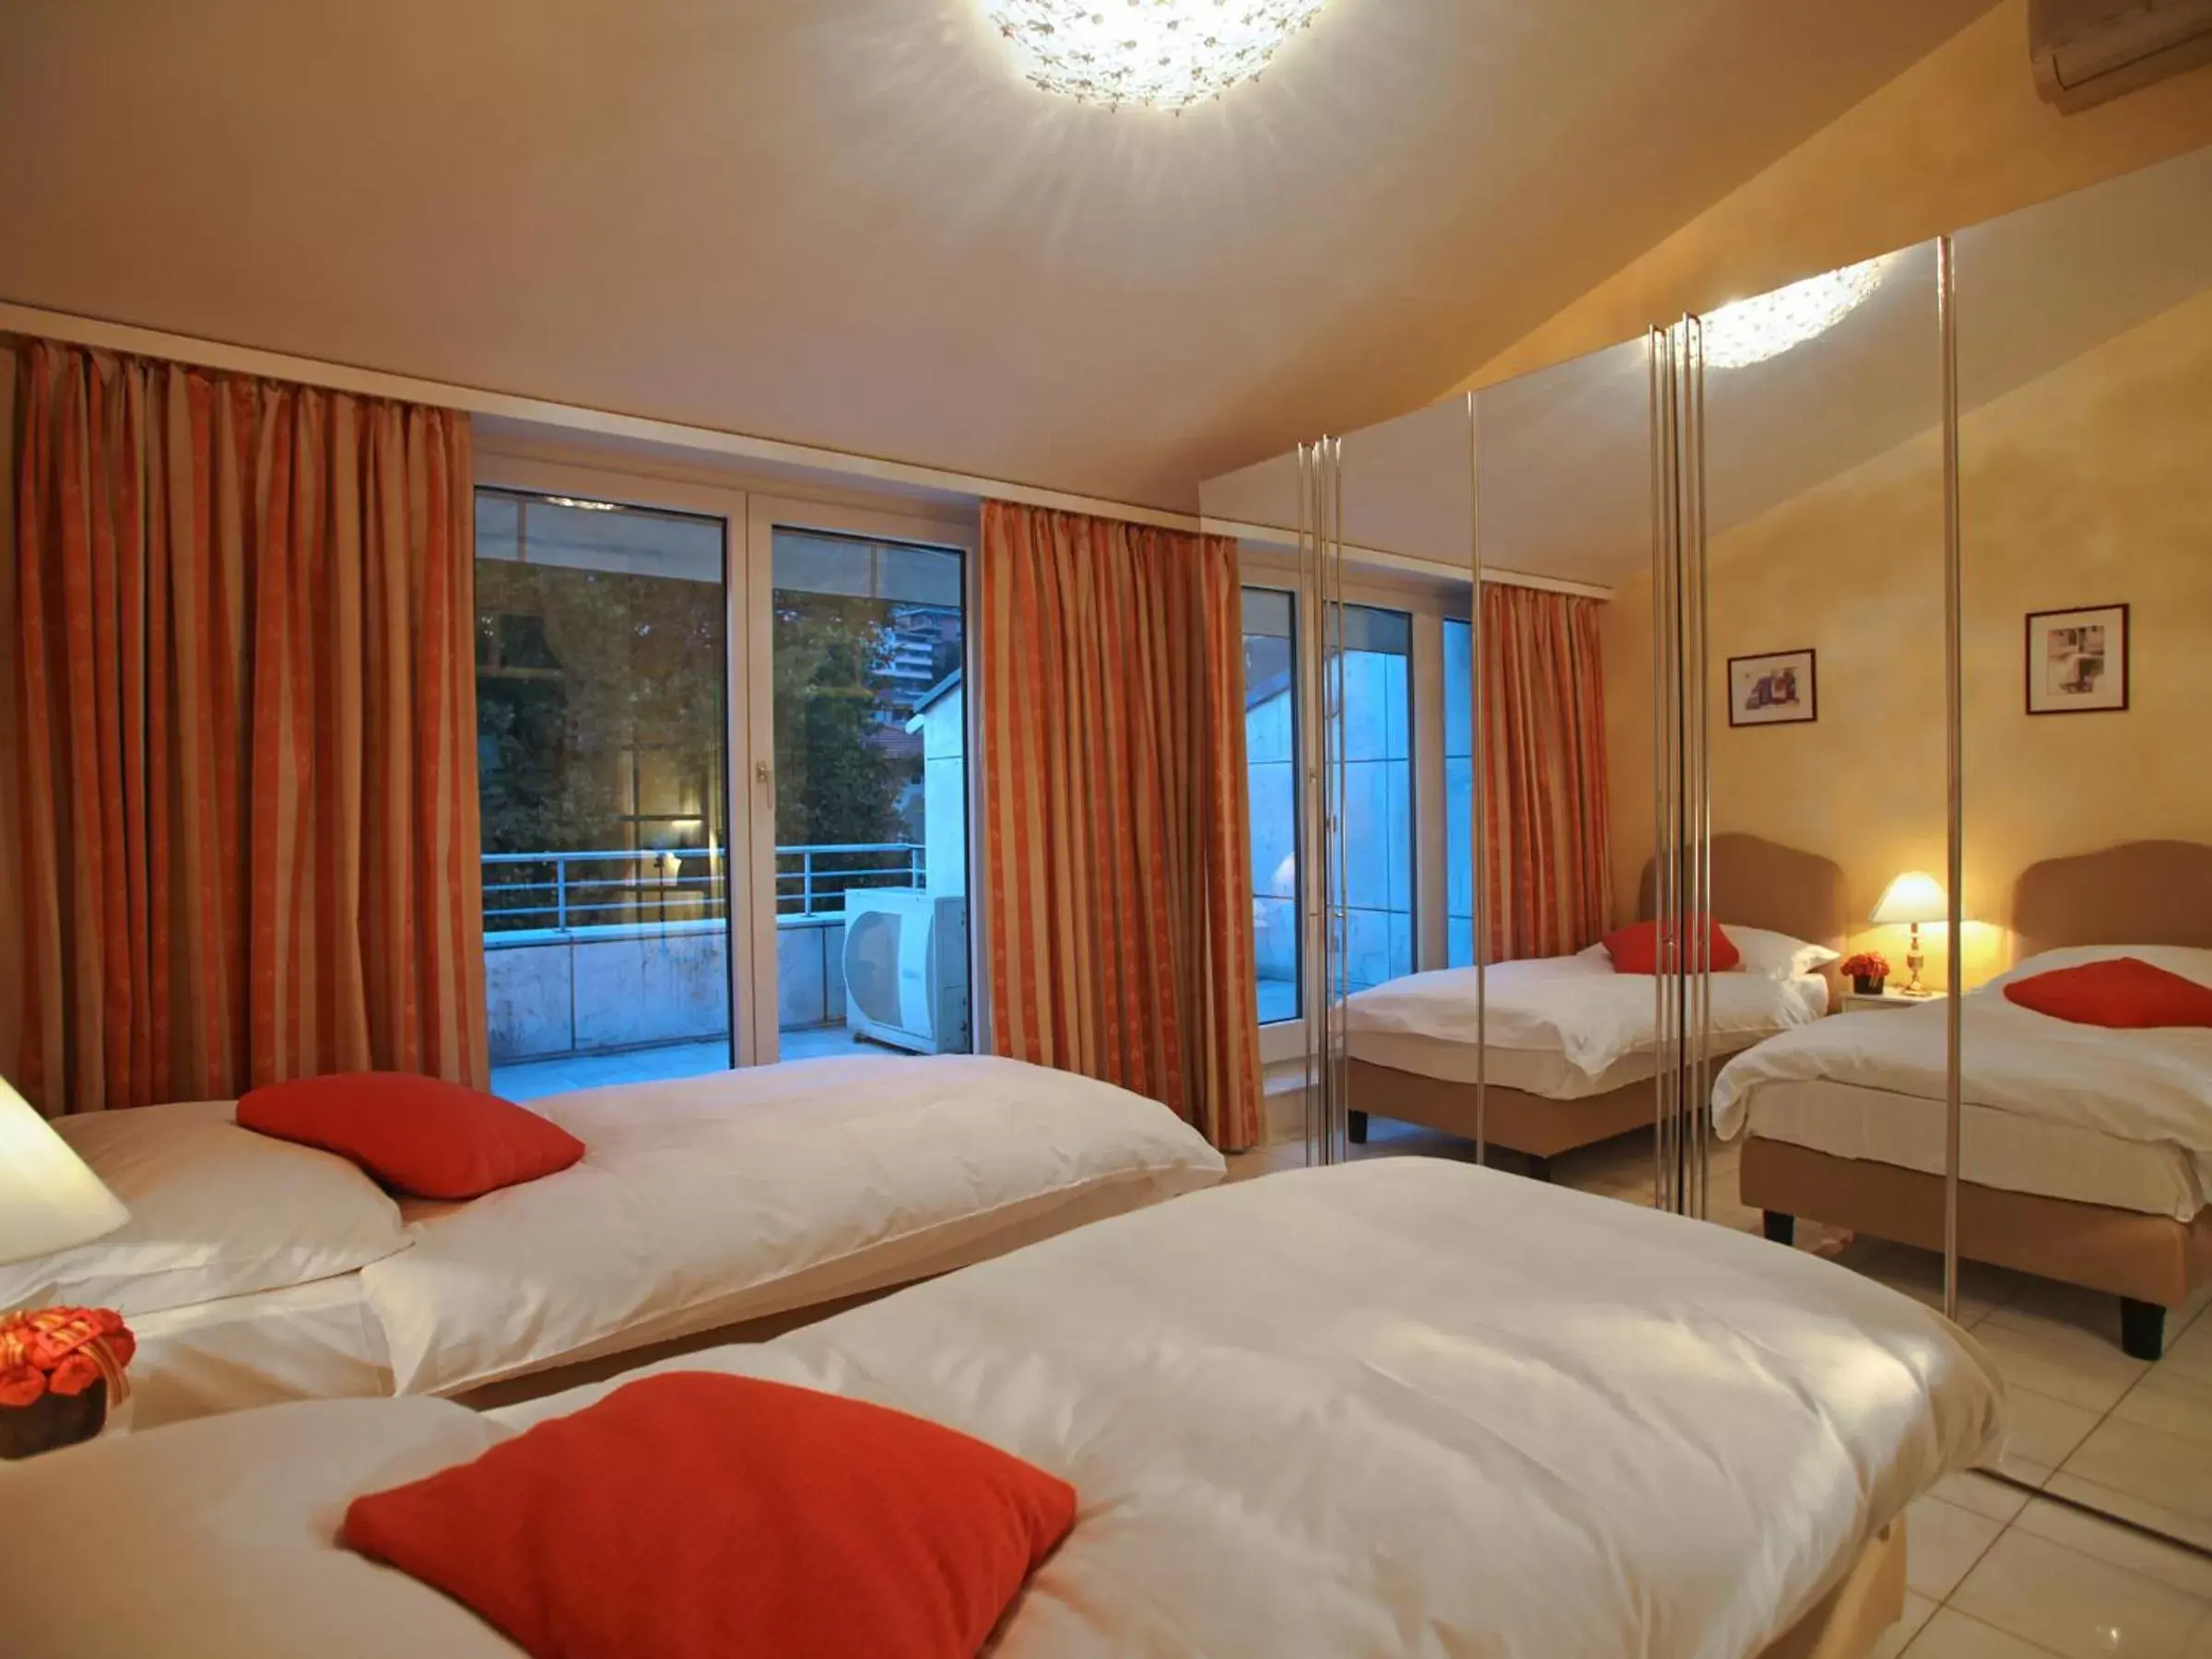 Bed in Villa Sassa Hotel, Residence & Spa - Ticino Hotels Group